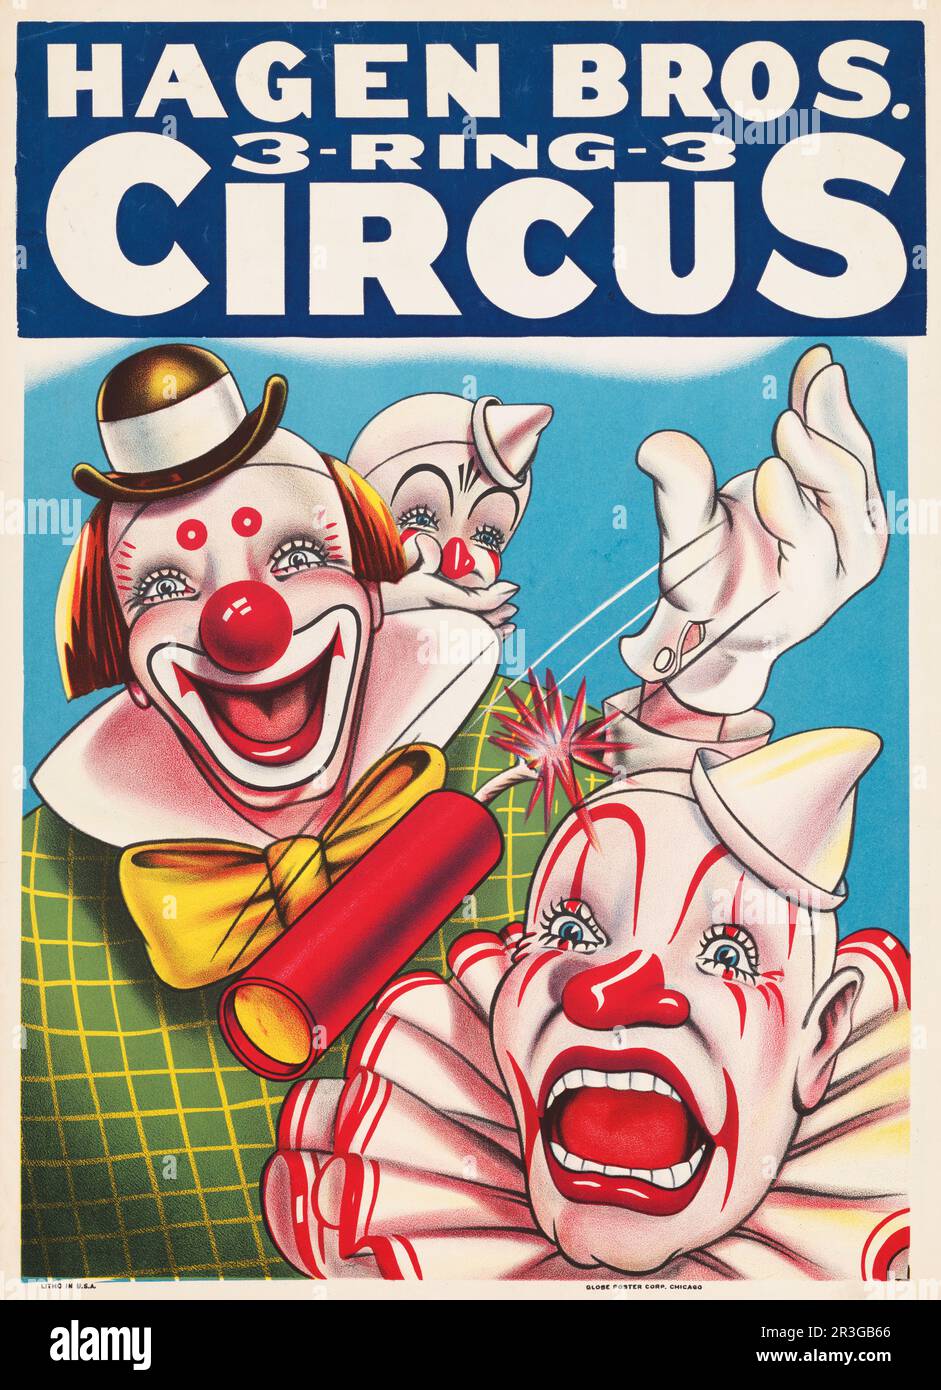 Vintage Hagen Brothers circus poster showing clown faces and fire cracker. Stock Photo